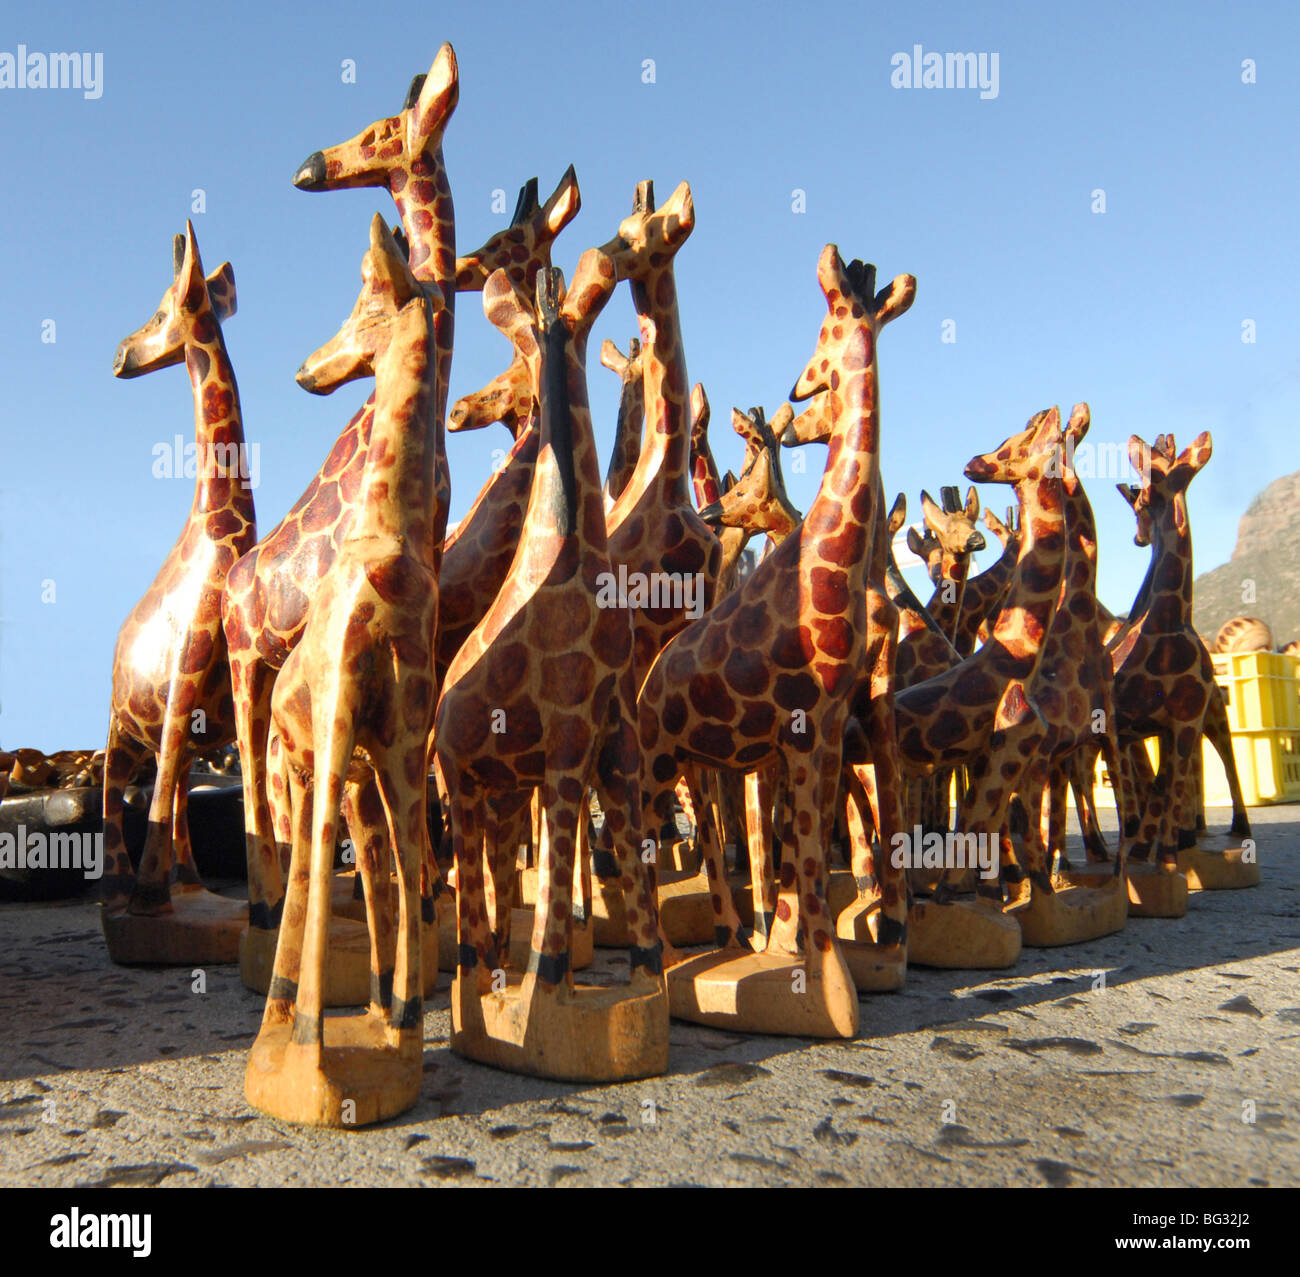 a group of hand carved wooden giraffes on sale at a market in Hout Bay, South Africa. Stock Photo